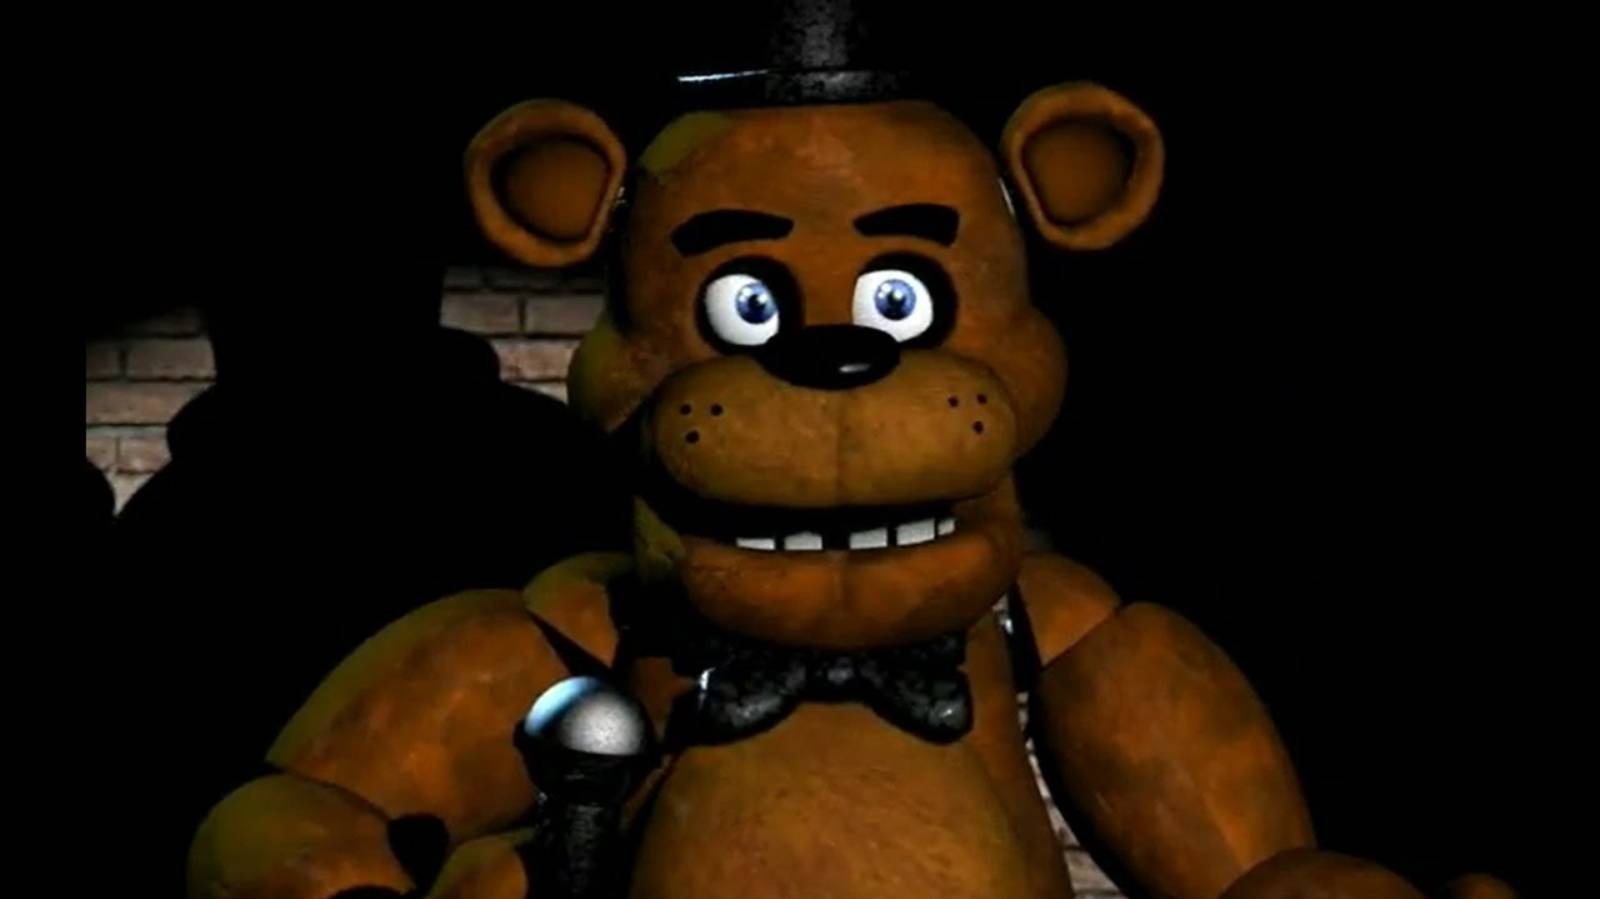 five nights at freddys movie song｜TikTok Search